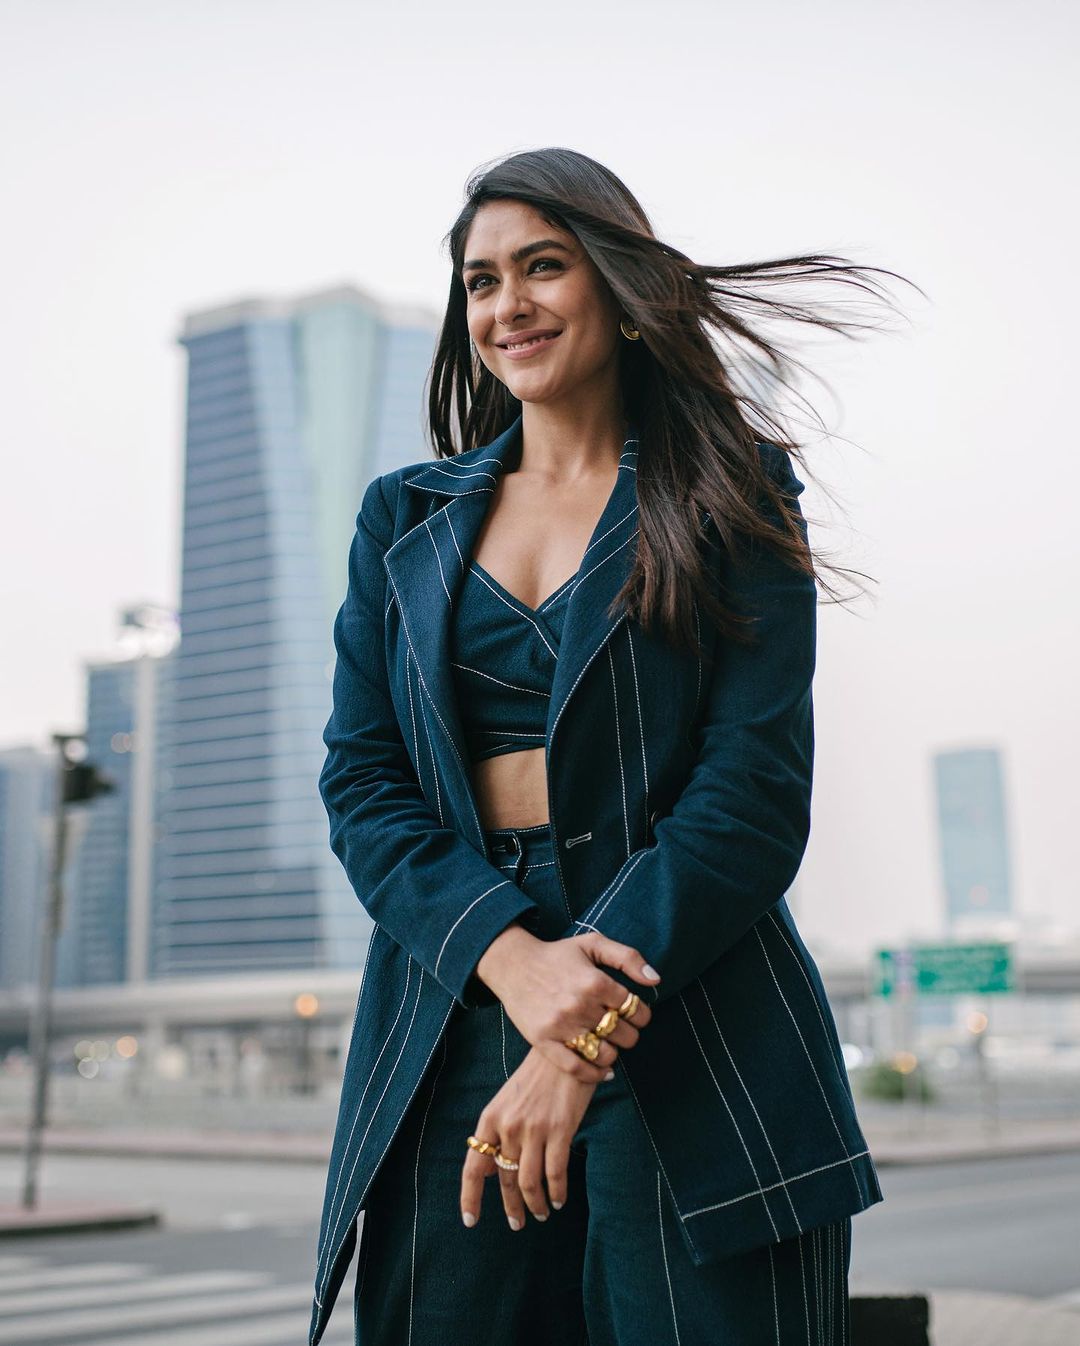 Watch this stylish pictures of actress mrunal thakur-Actressmrunal, Mrunal Thakur, Mrunalthakur Photos,Spicy Hot Pics,Images,High Resolution WallPapers Download